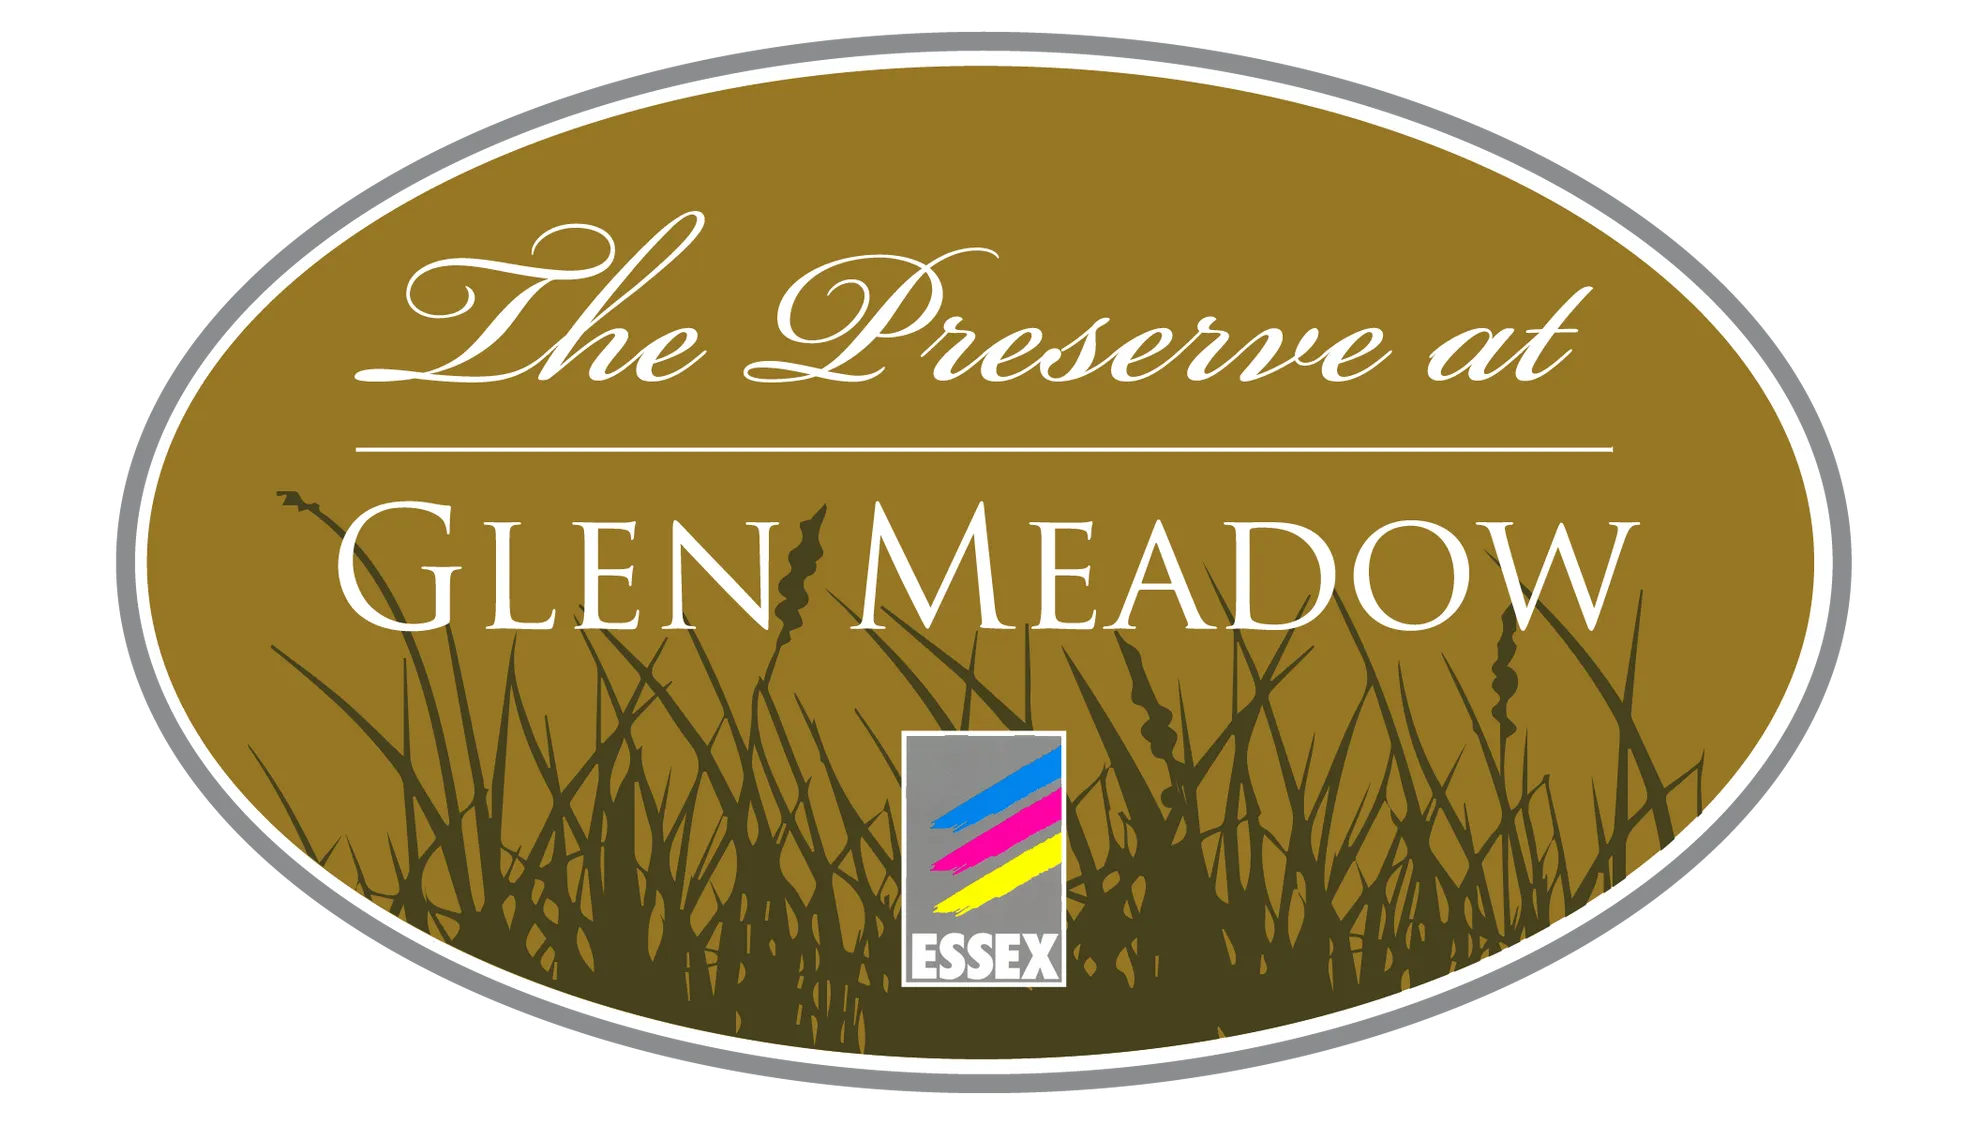 the preserve at glen meadow community